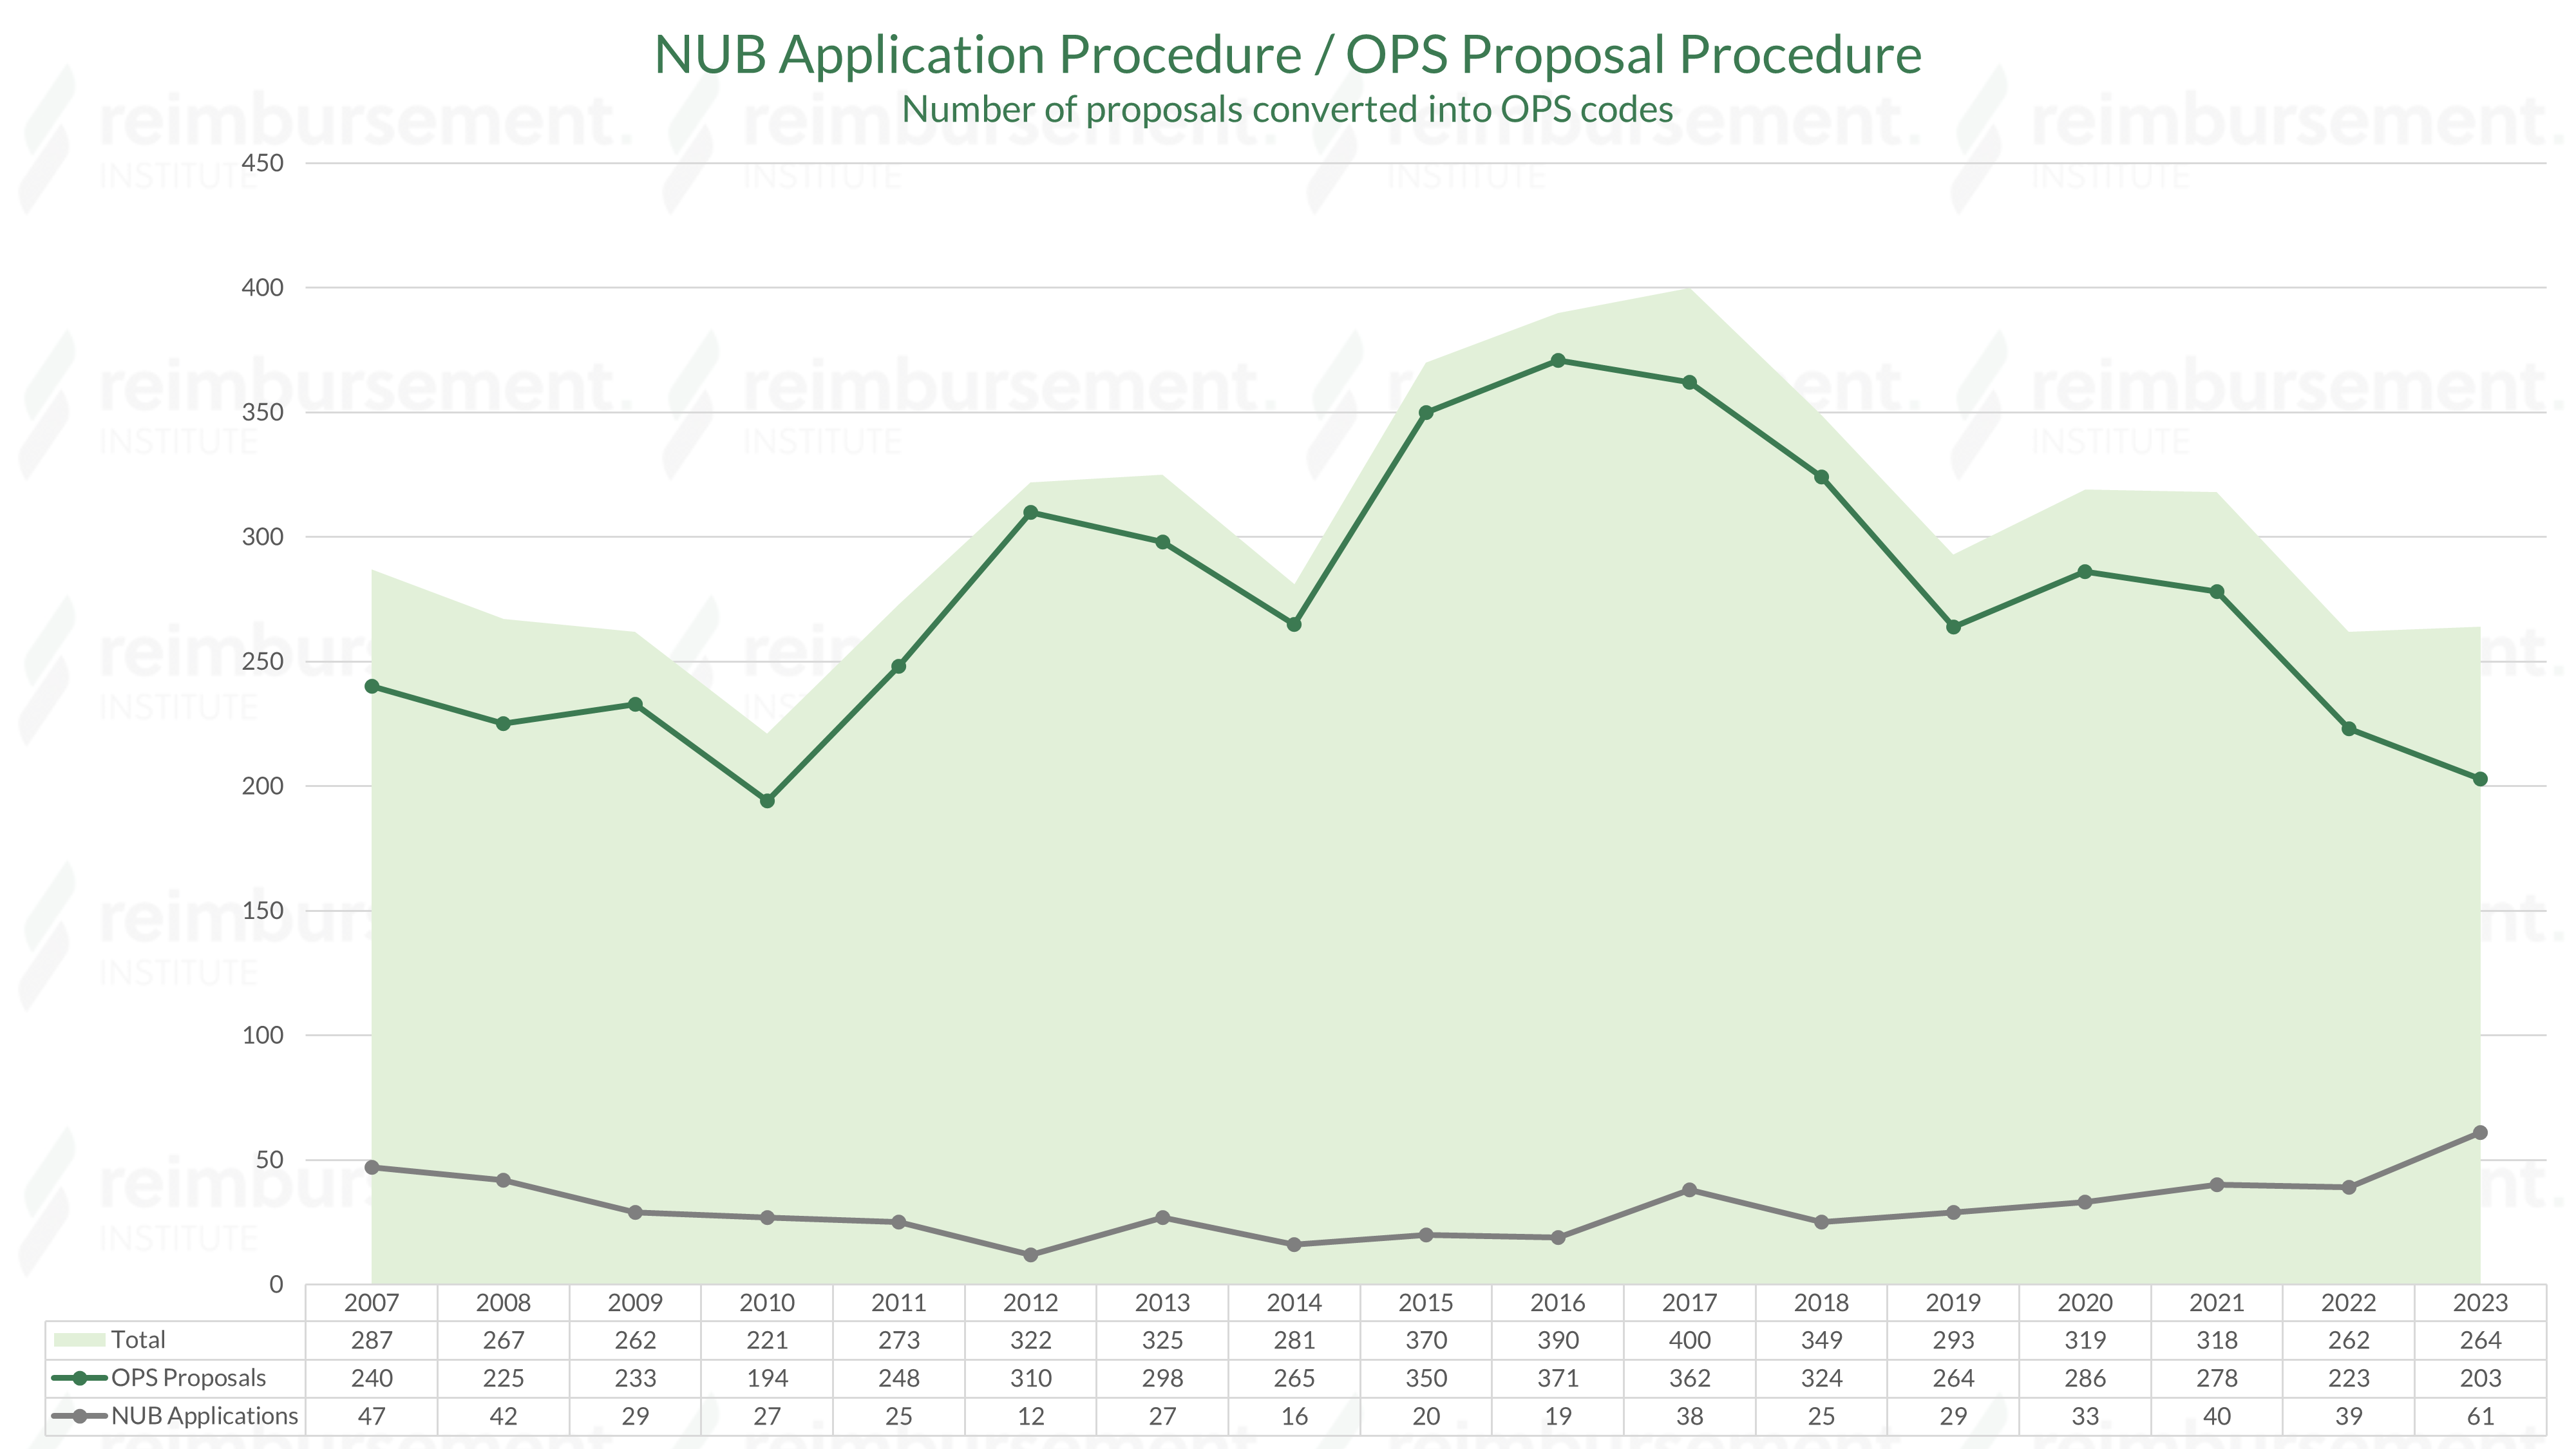 Showing the history of conversions from NUB requests and OPS proposals to OPS codes.